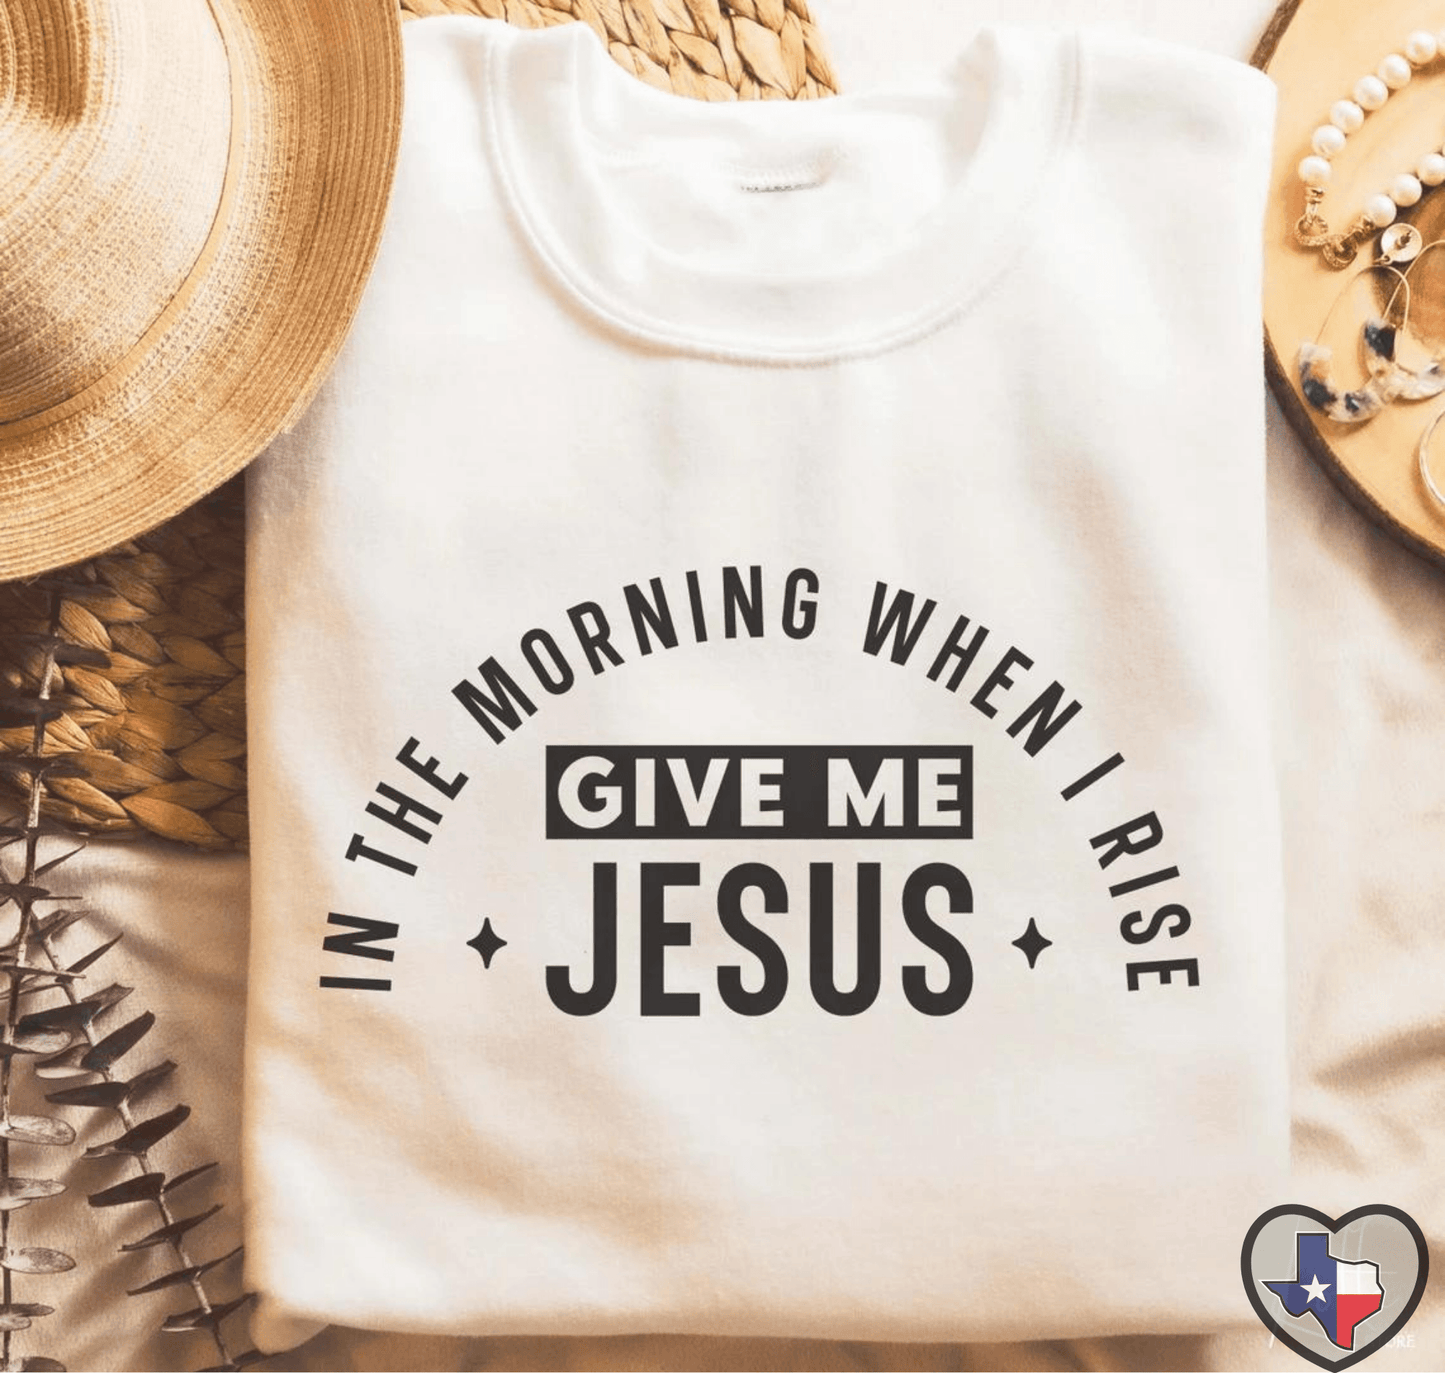 In The Morning When I Rise Give Me Jesus - Texas Transfers and Designs